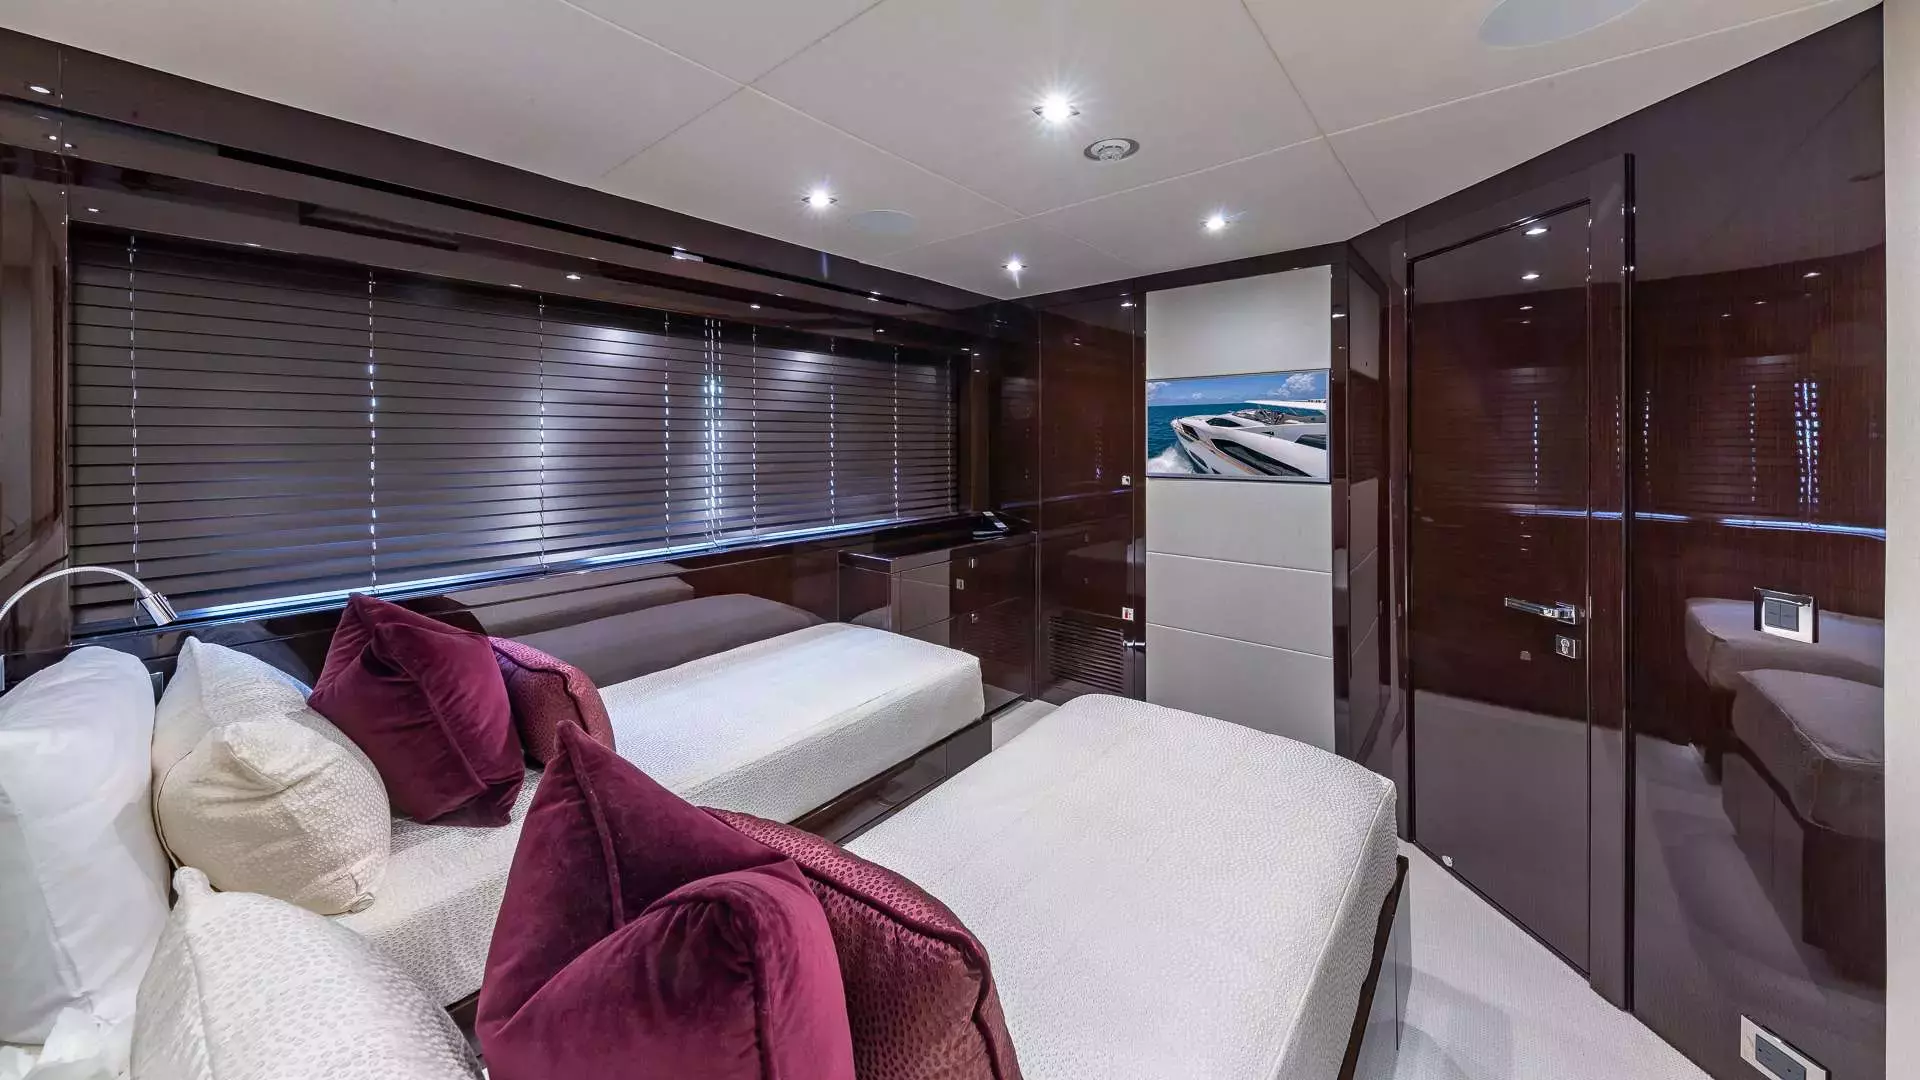 Mirracle by Sunseeker - Top rates for a Charter of a private Motor Yacht in Bahamas